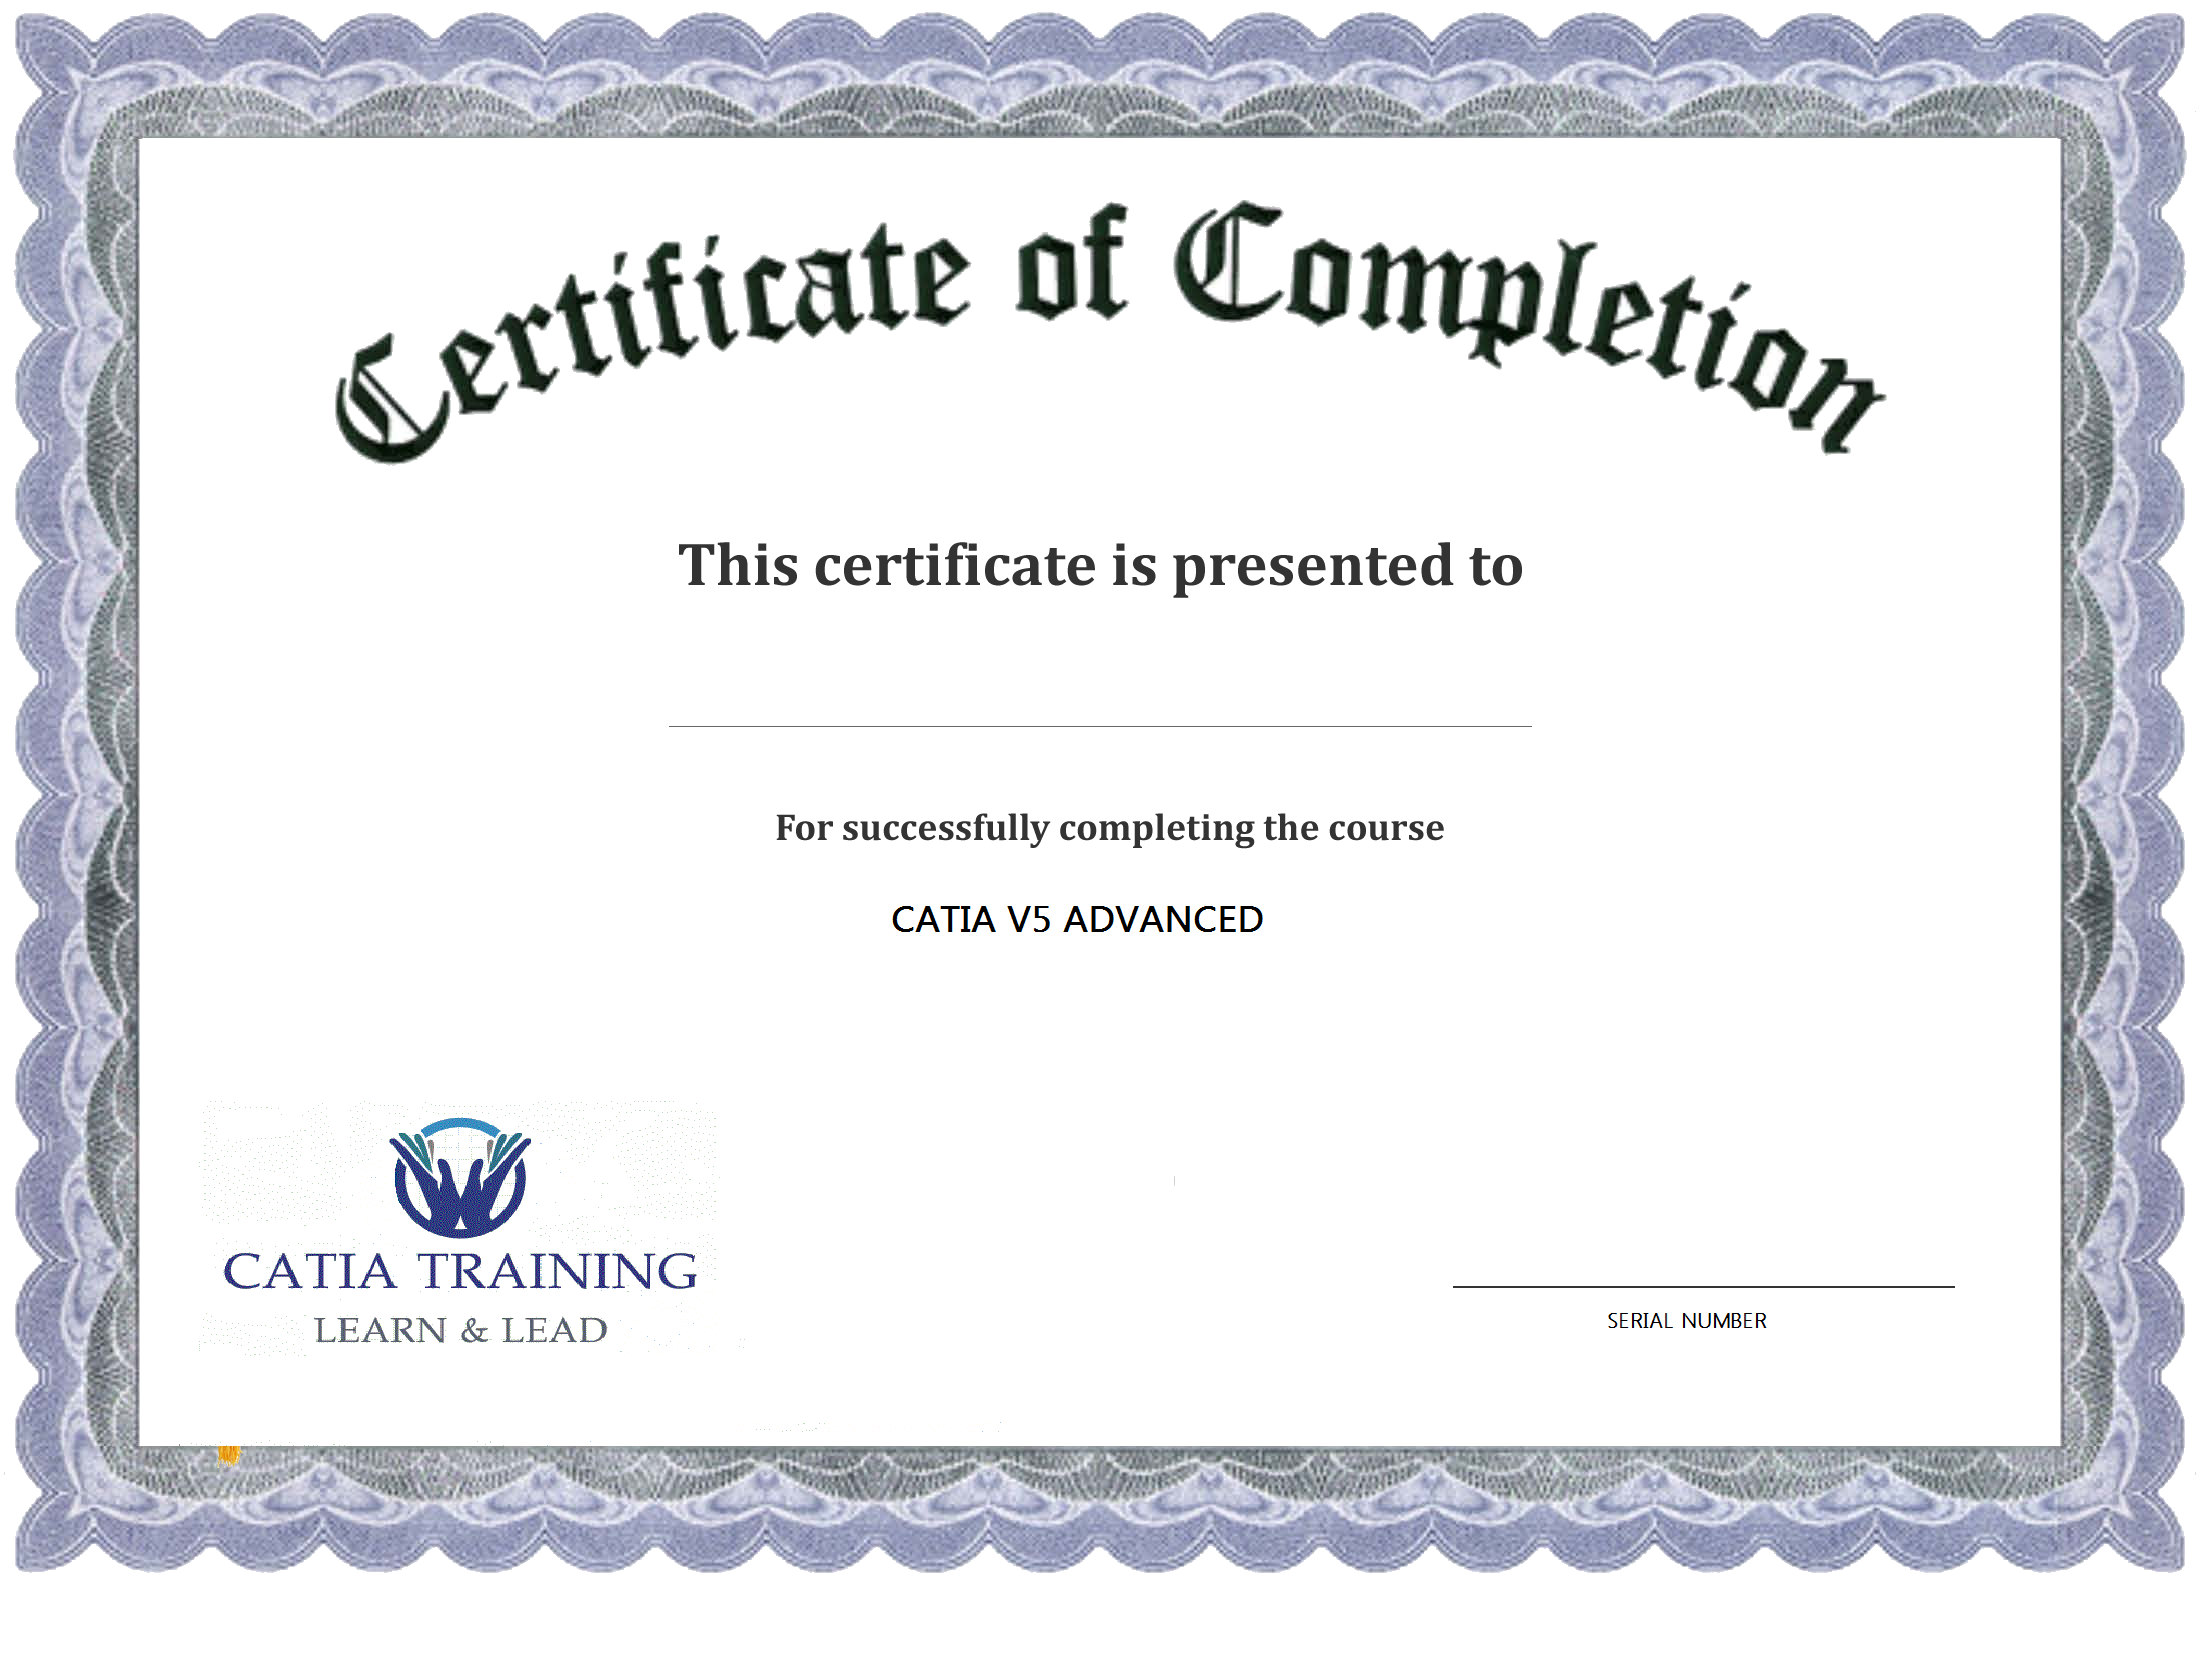 Certificate Of Completion Template Word – task list templates
 Blank Certificate Templates For Word Free